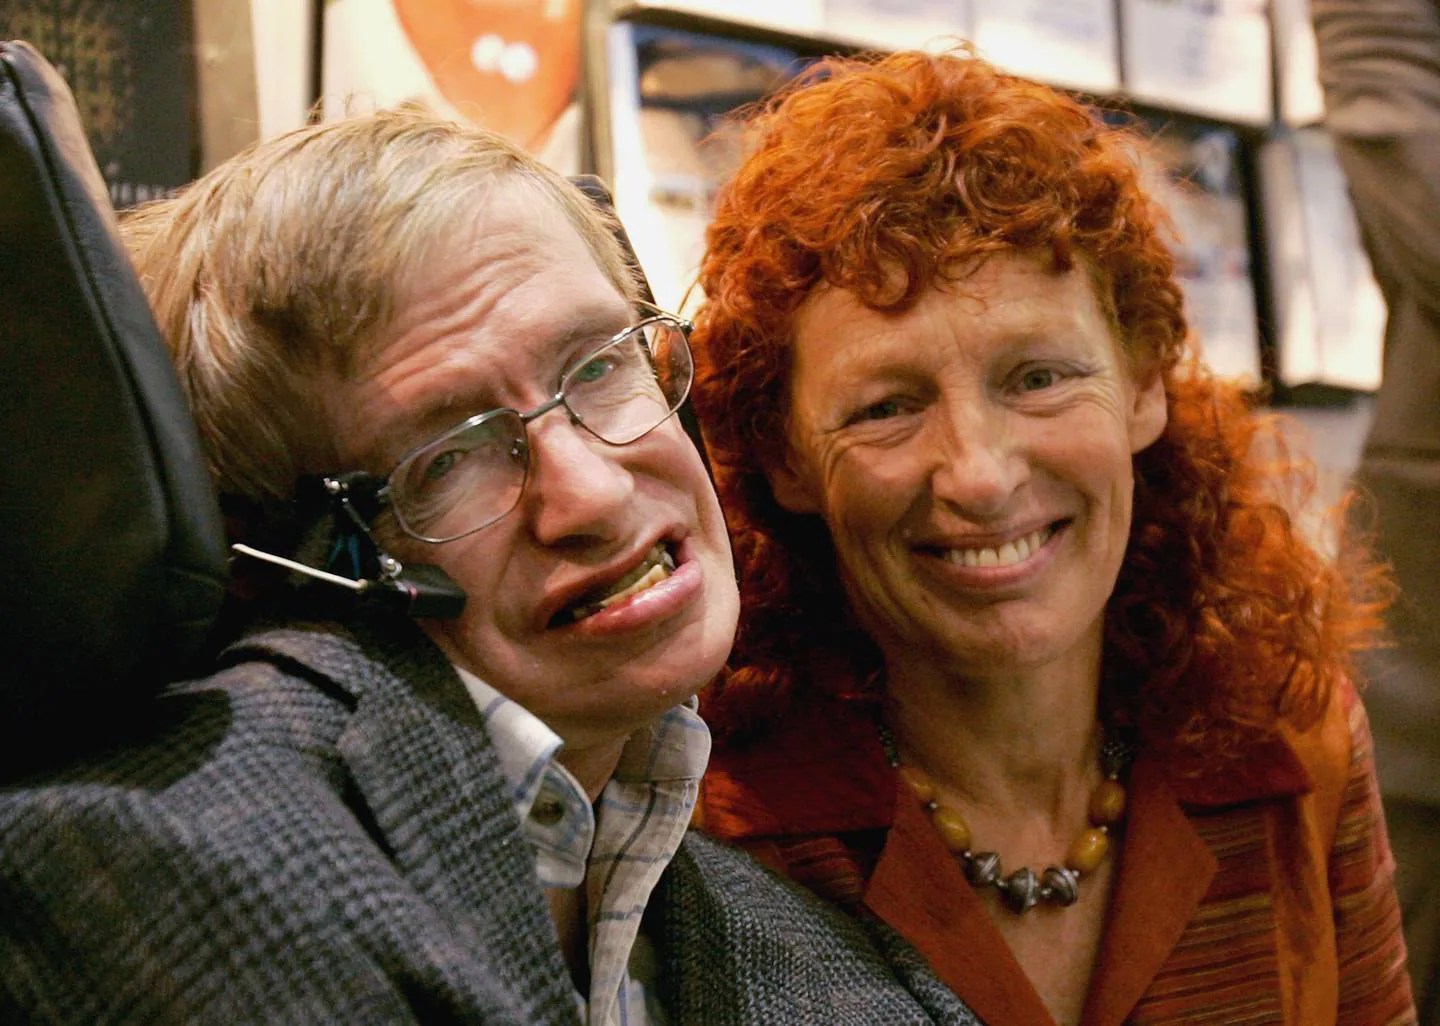 Stephen Hawking's tangled private life Two marriages ended in divorce